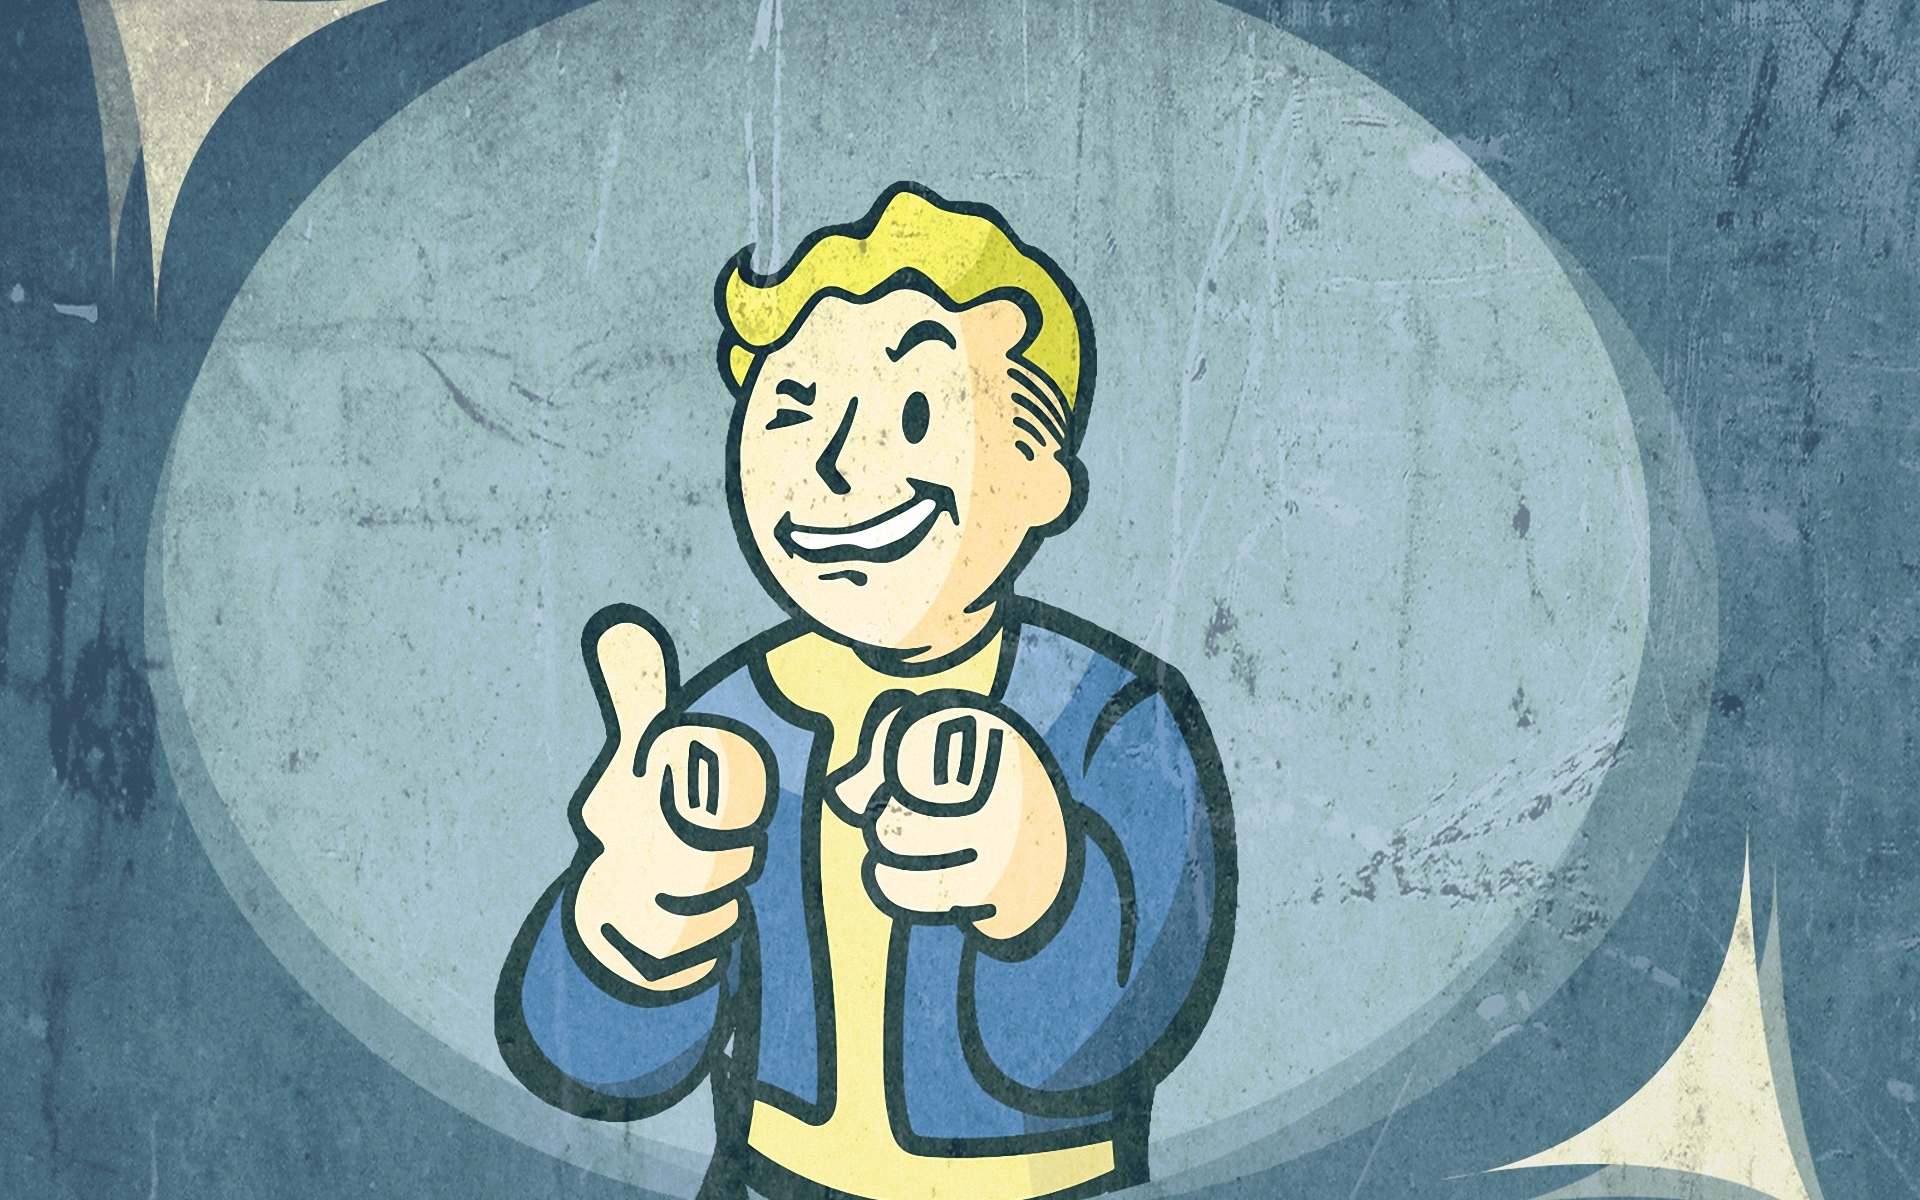 fallout, vault boy, fallout 4, video game, fallout 3